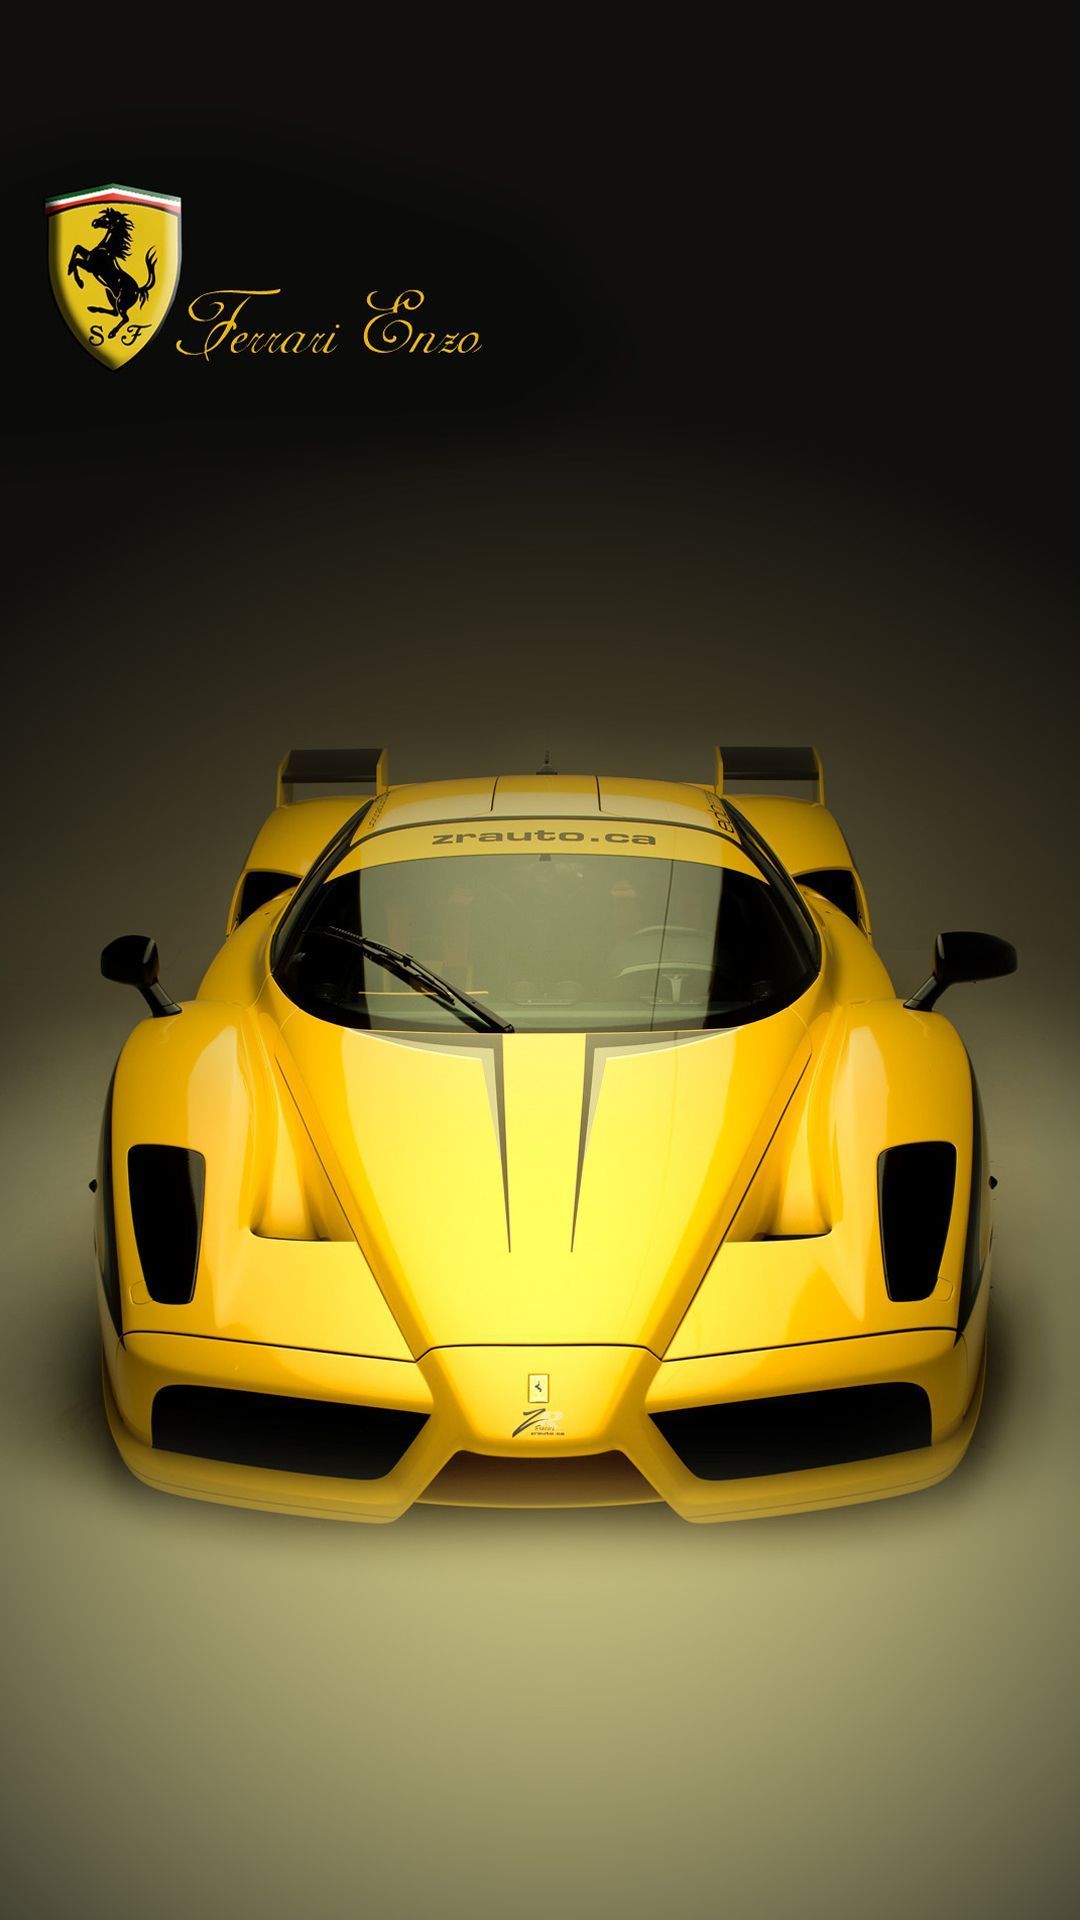 World Luxury Car iPhone 6 Wallpaper Download | iPhone Wallpapers ...